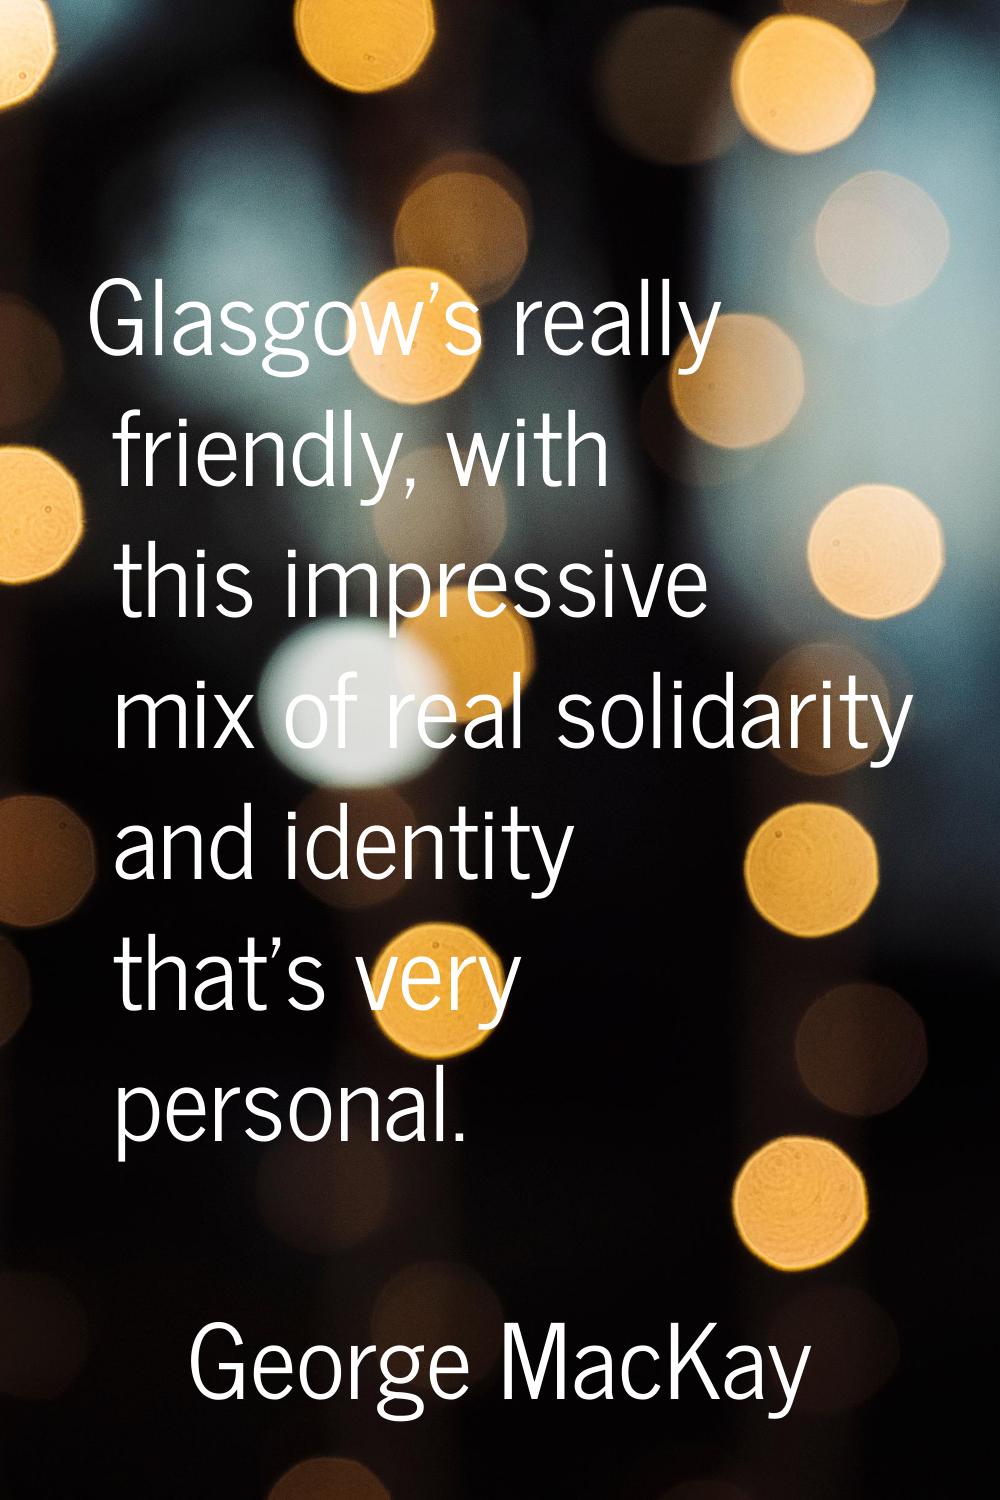 Glasgow's really friendly, with this impressive mix of real solidarity and identity that's very per